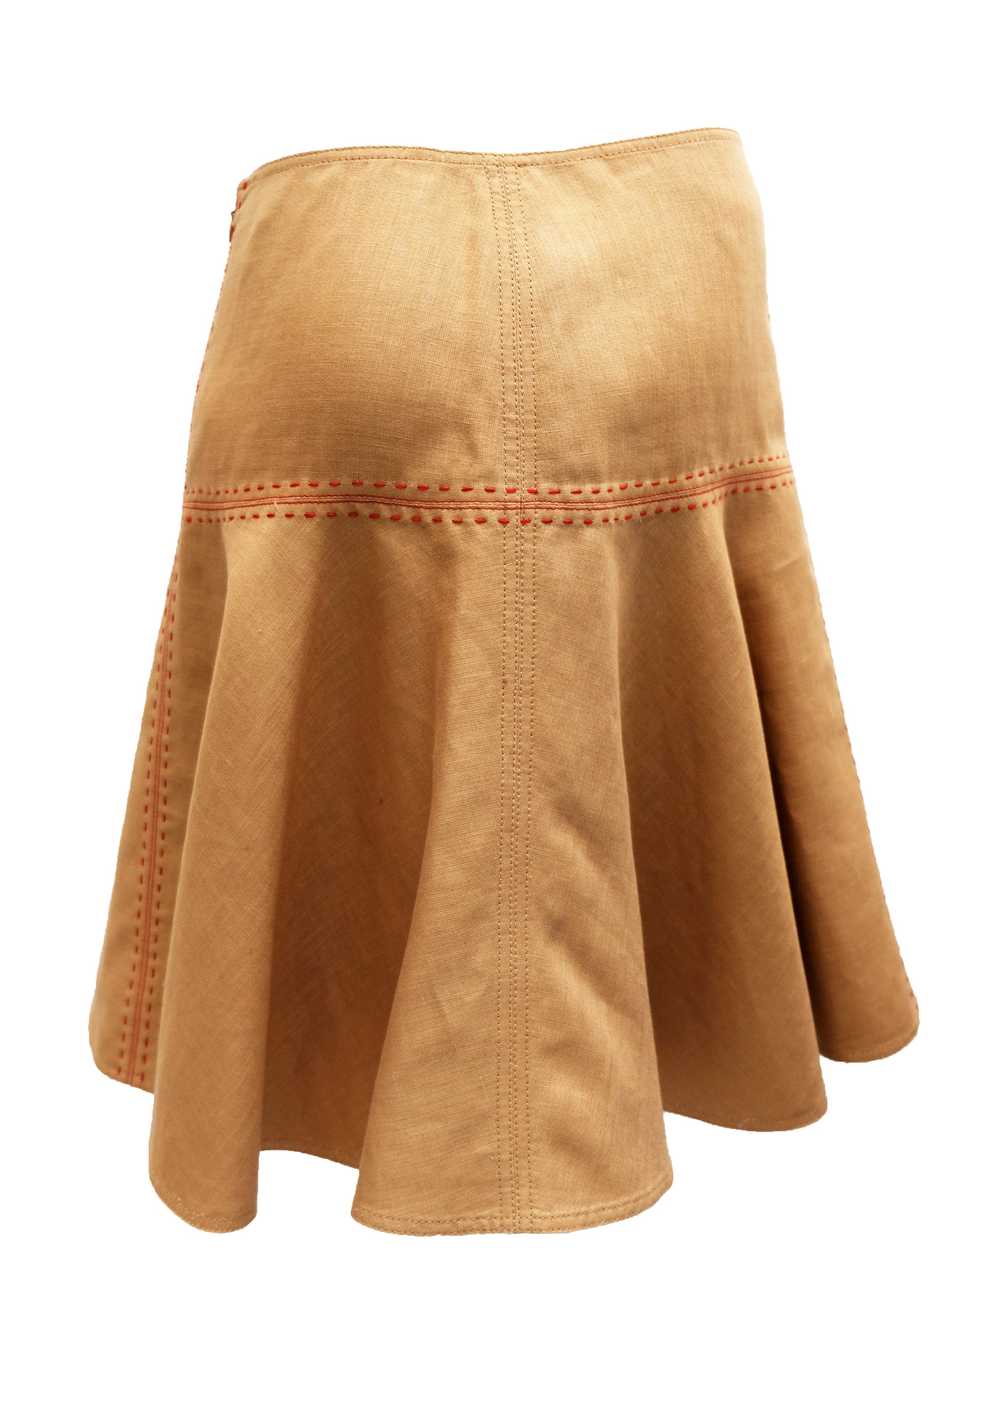 Anne Klein Skater Skirt in Tan Linen with Red Ove… - image 4